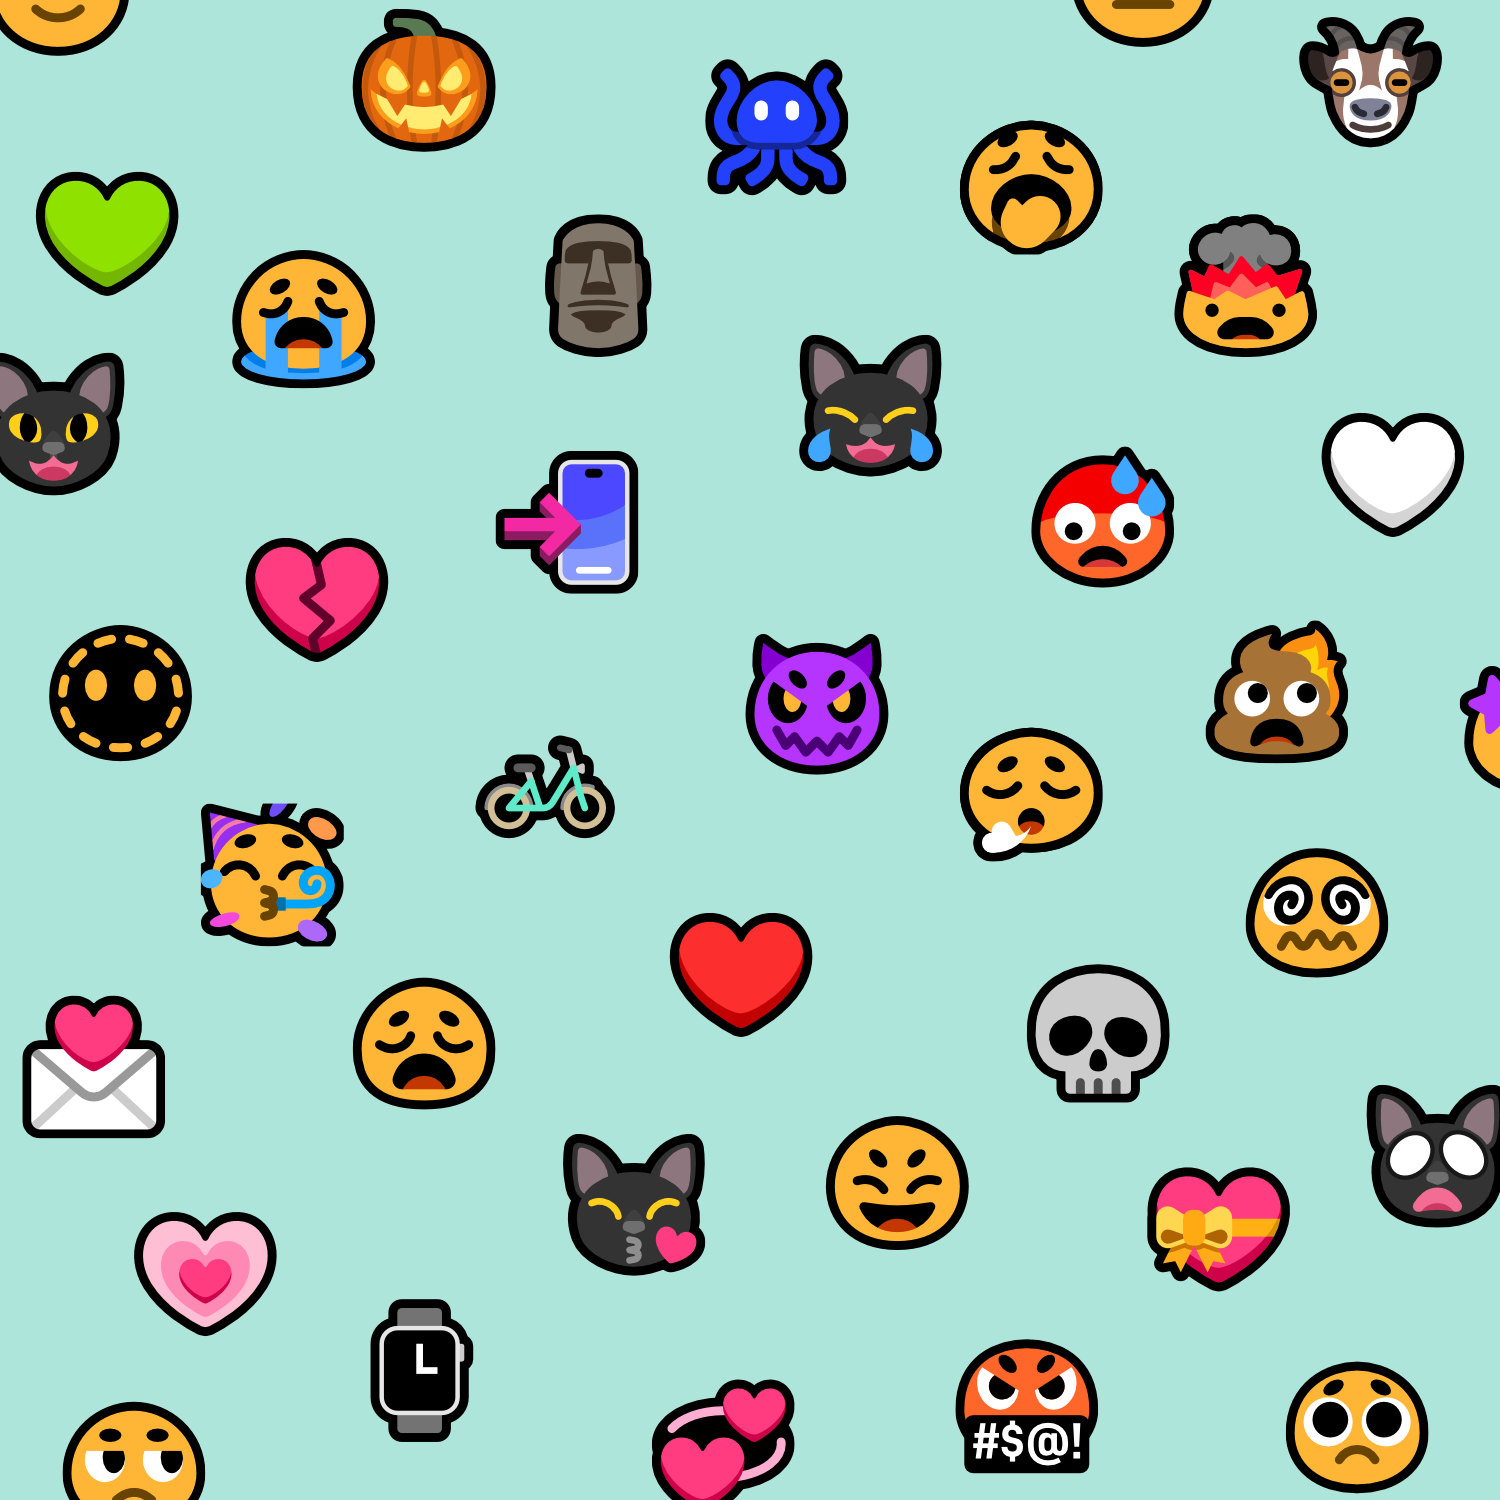 A mint green background with lots of different emoji in a soft, minimalist vector aesthetic with thick black outline scattered across it, many of them are smileys, some are objects like watches, bicycles and phones, some are black cats, and some are silly or thematic symbols like alien monster, skull and jack-o'-lantern.